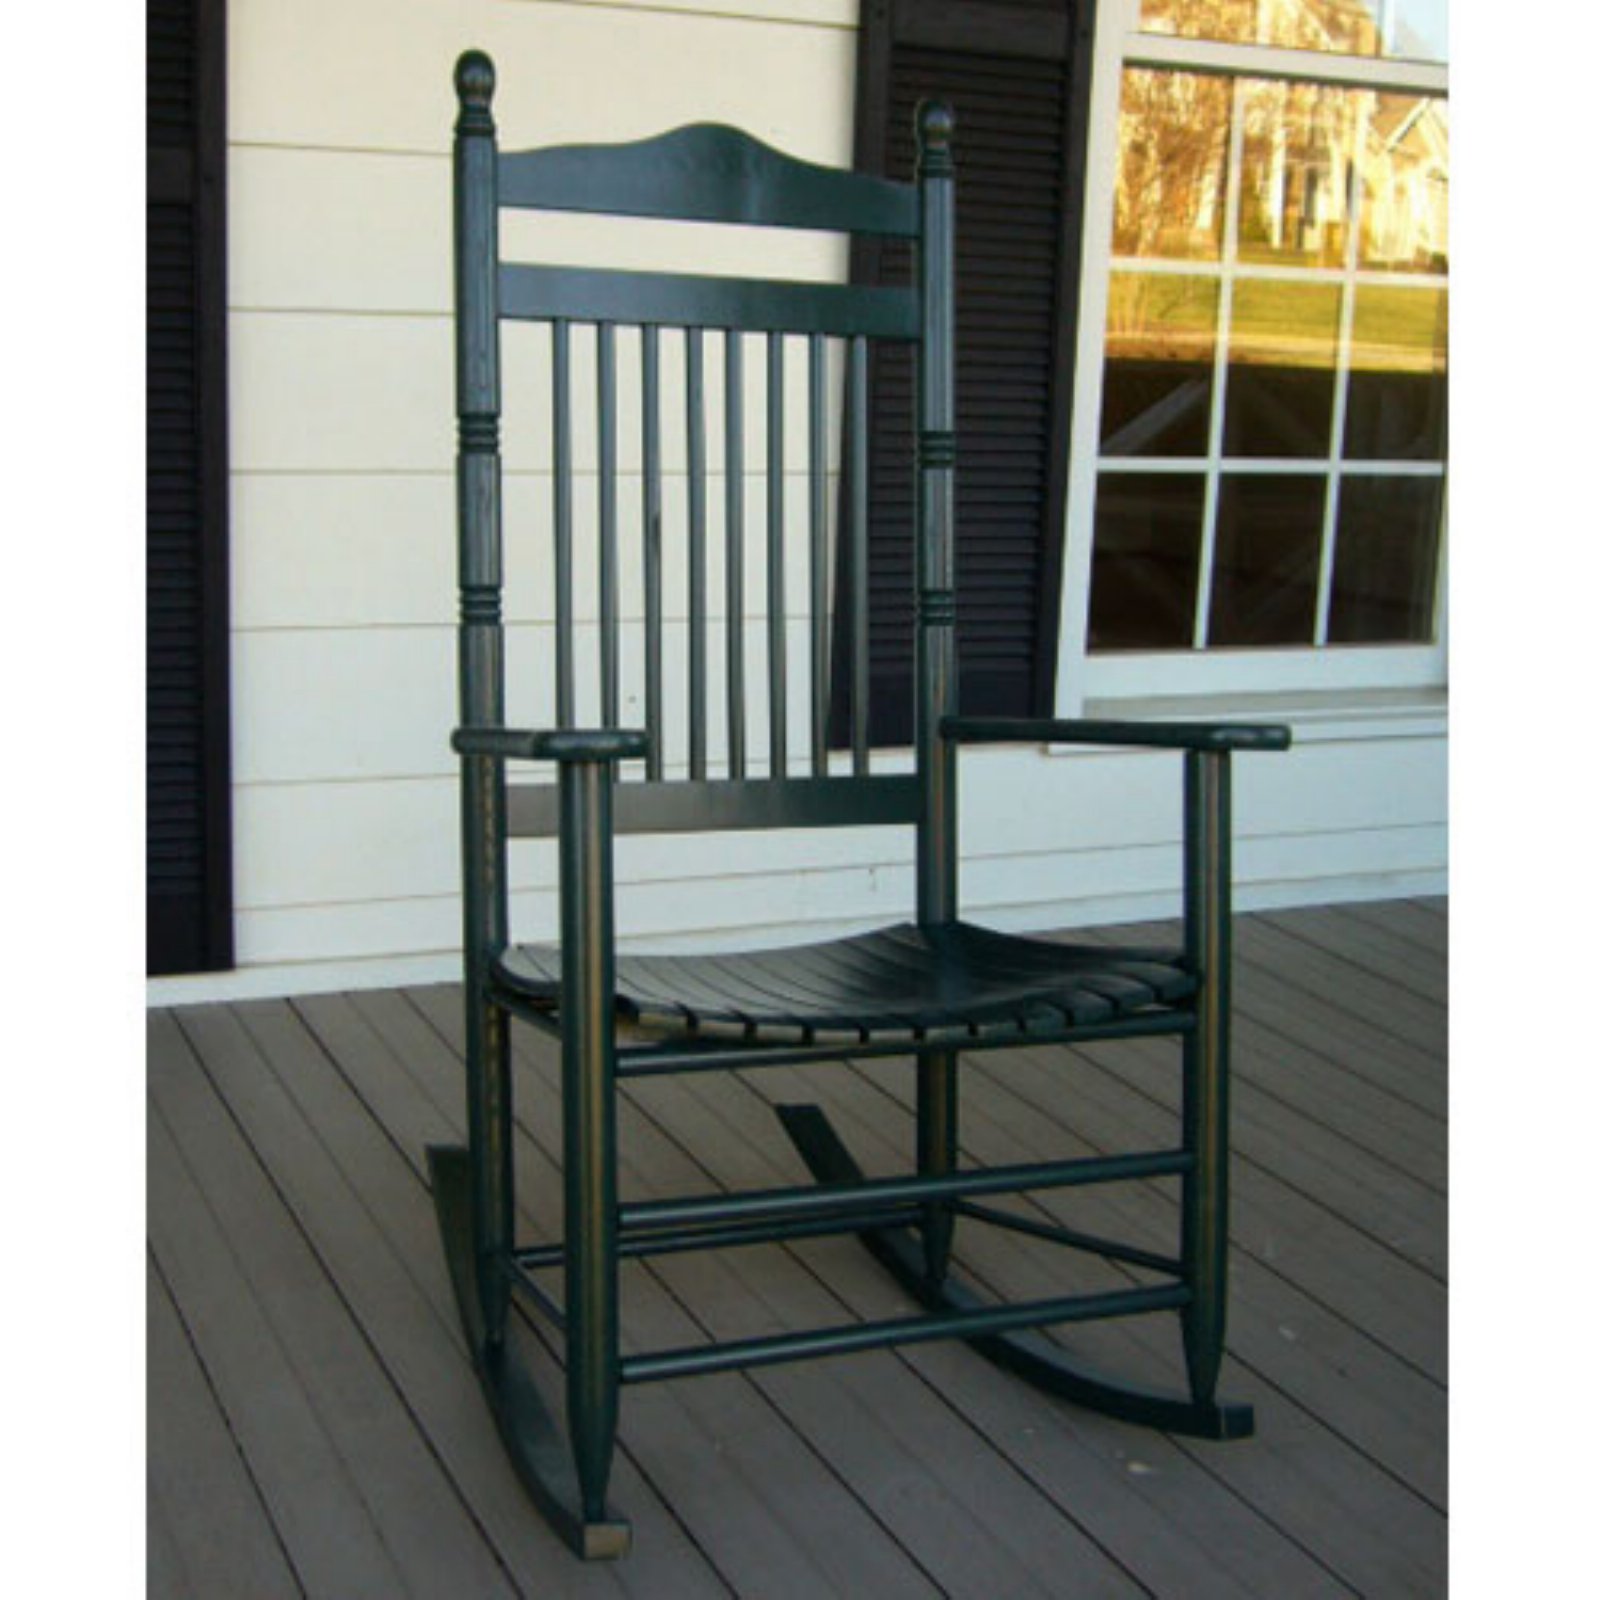 Dixie Seating Calabash Indoor/Outdoor Spindle Ready-To-Assemble Rocking Chair - image 5 of 8